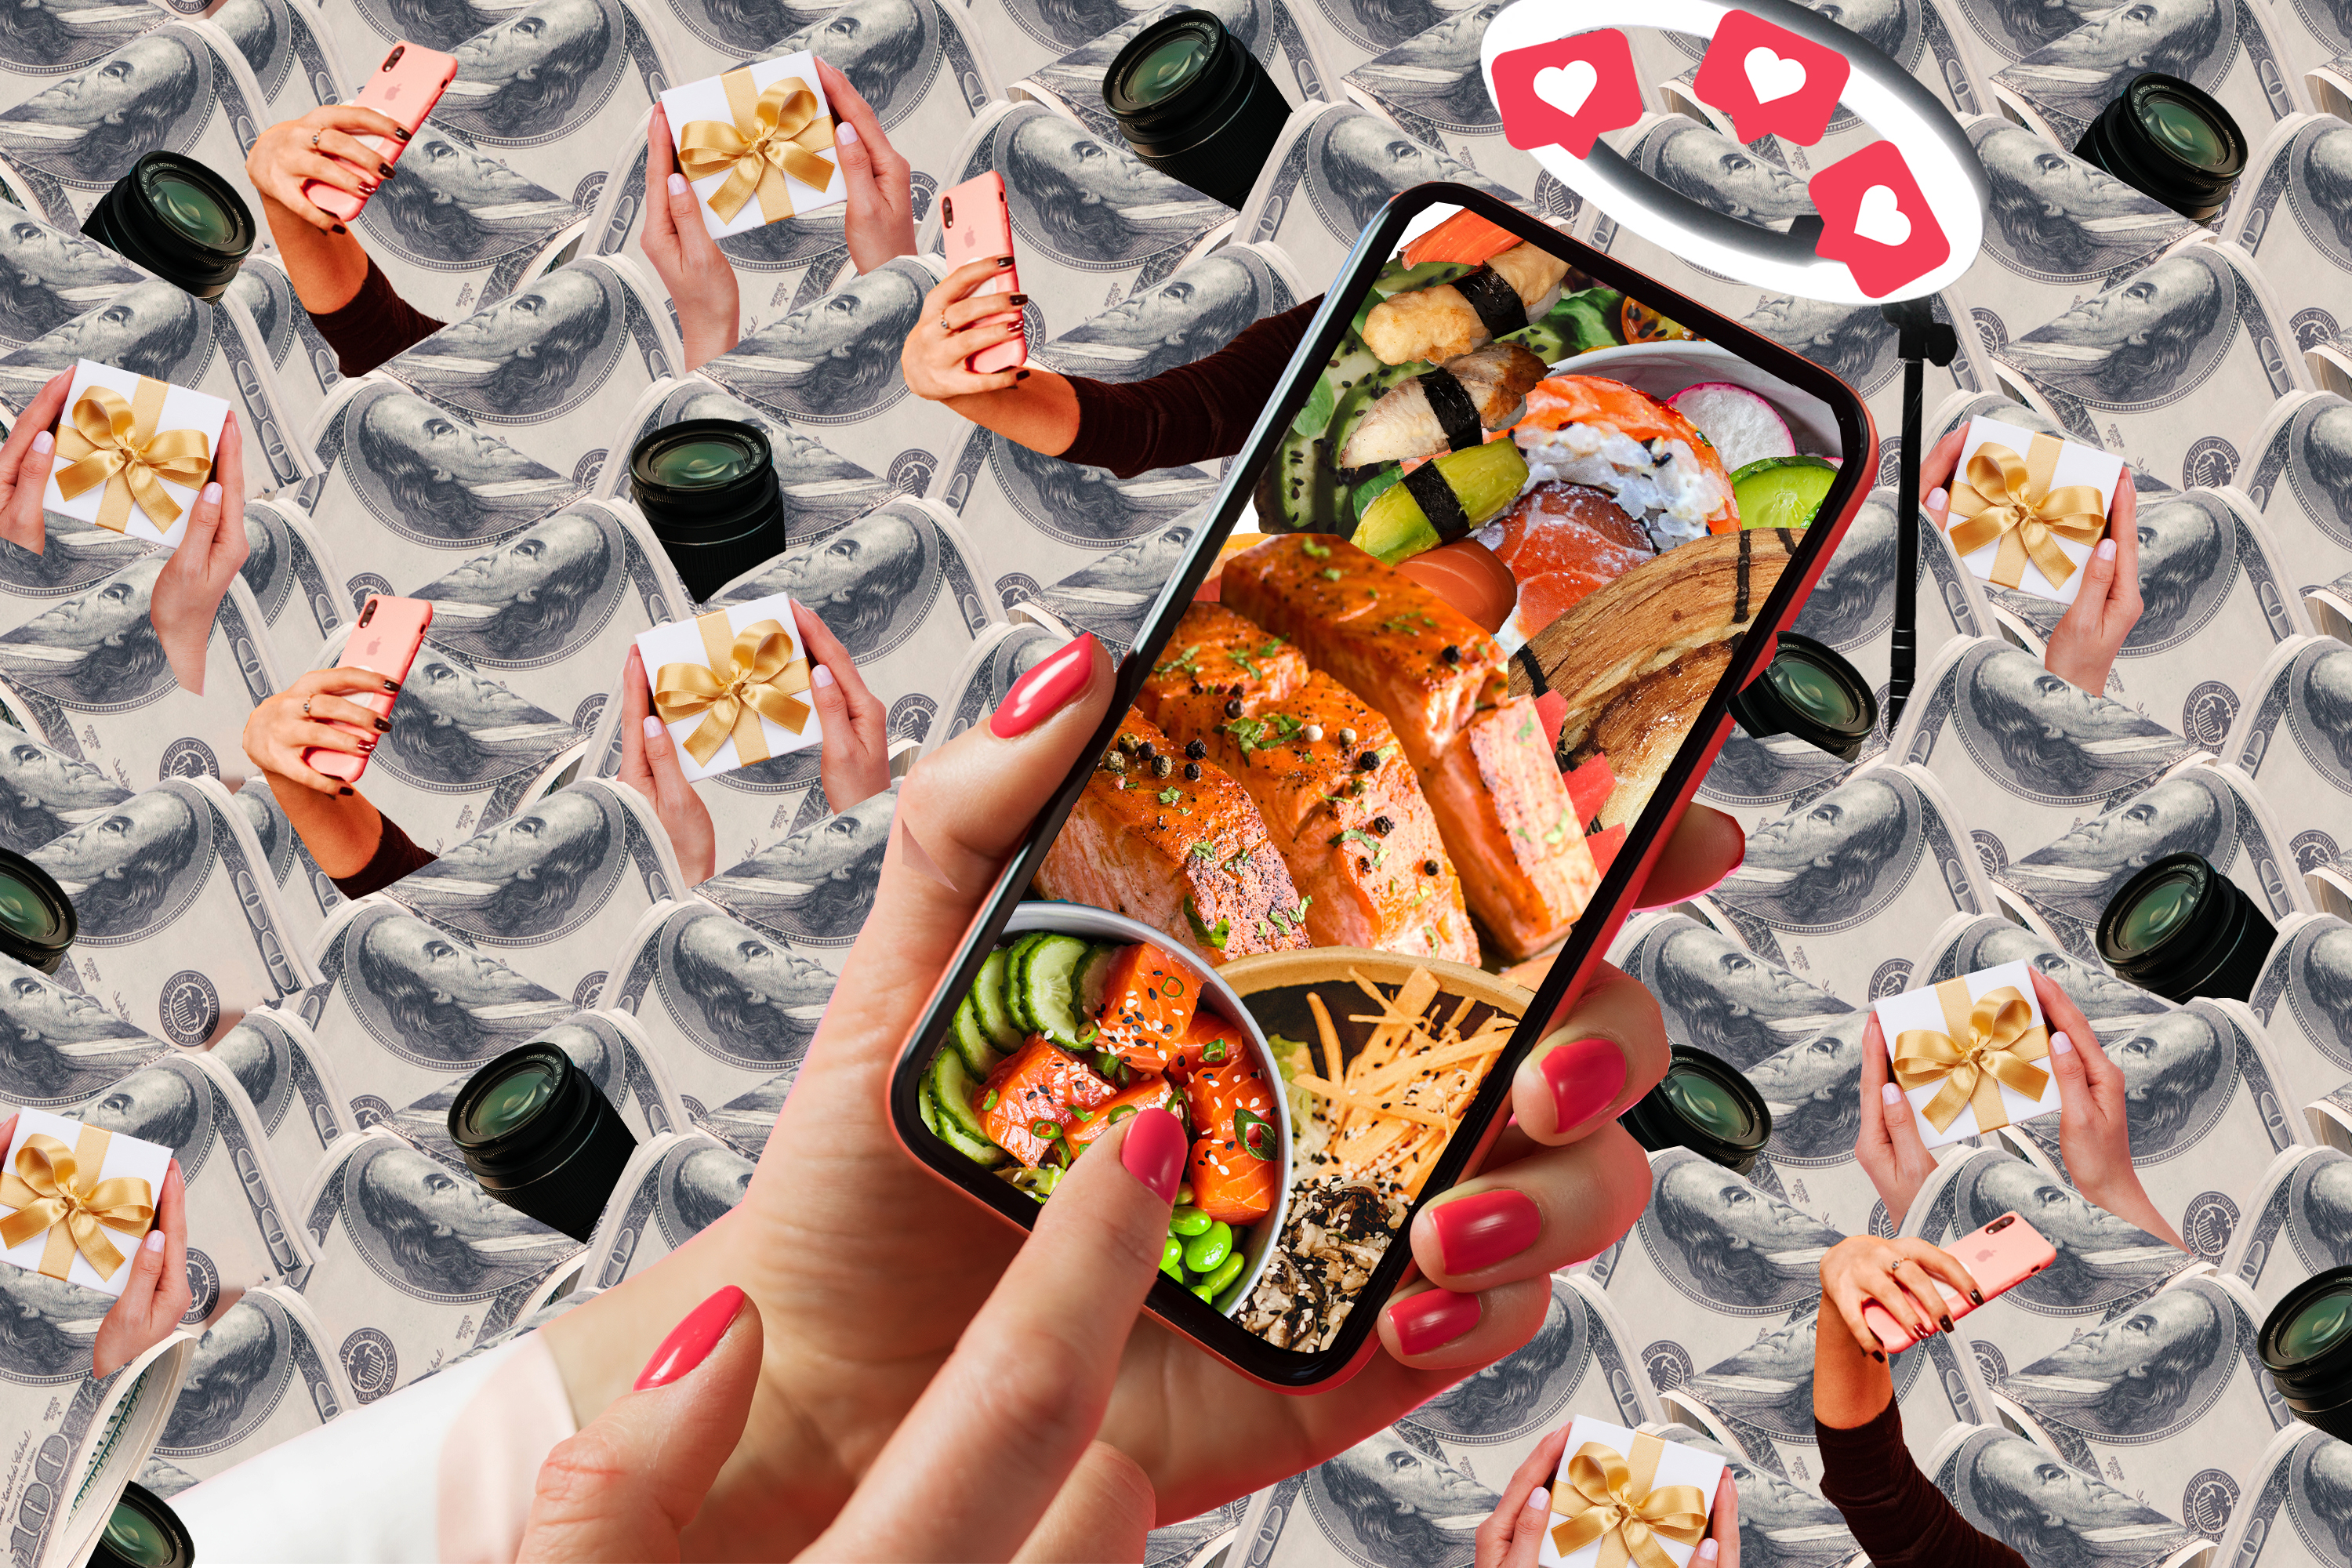 Collage of a hand holding up a smartphone that contains images of sandwiches and poke bowls, over a background of hands holding up smartphones and money.